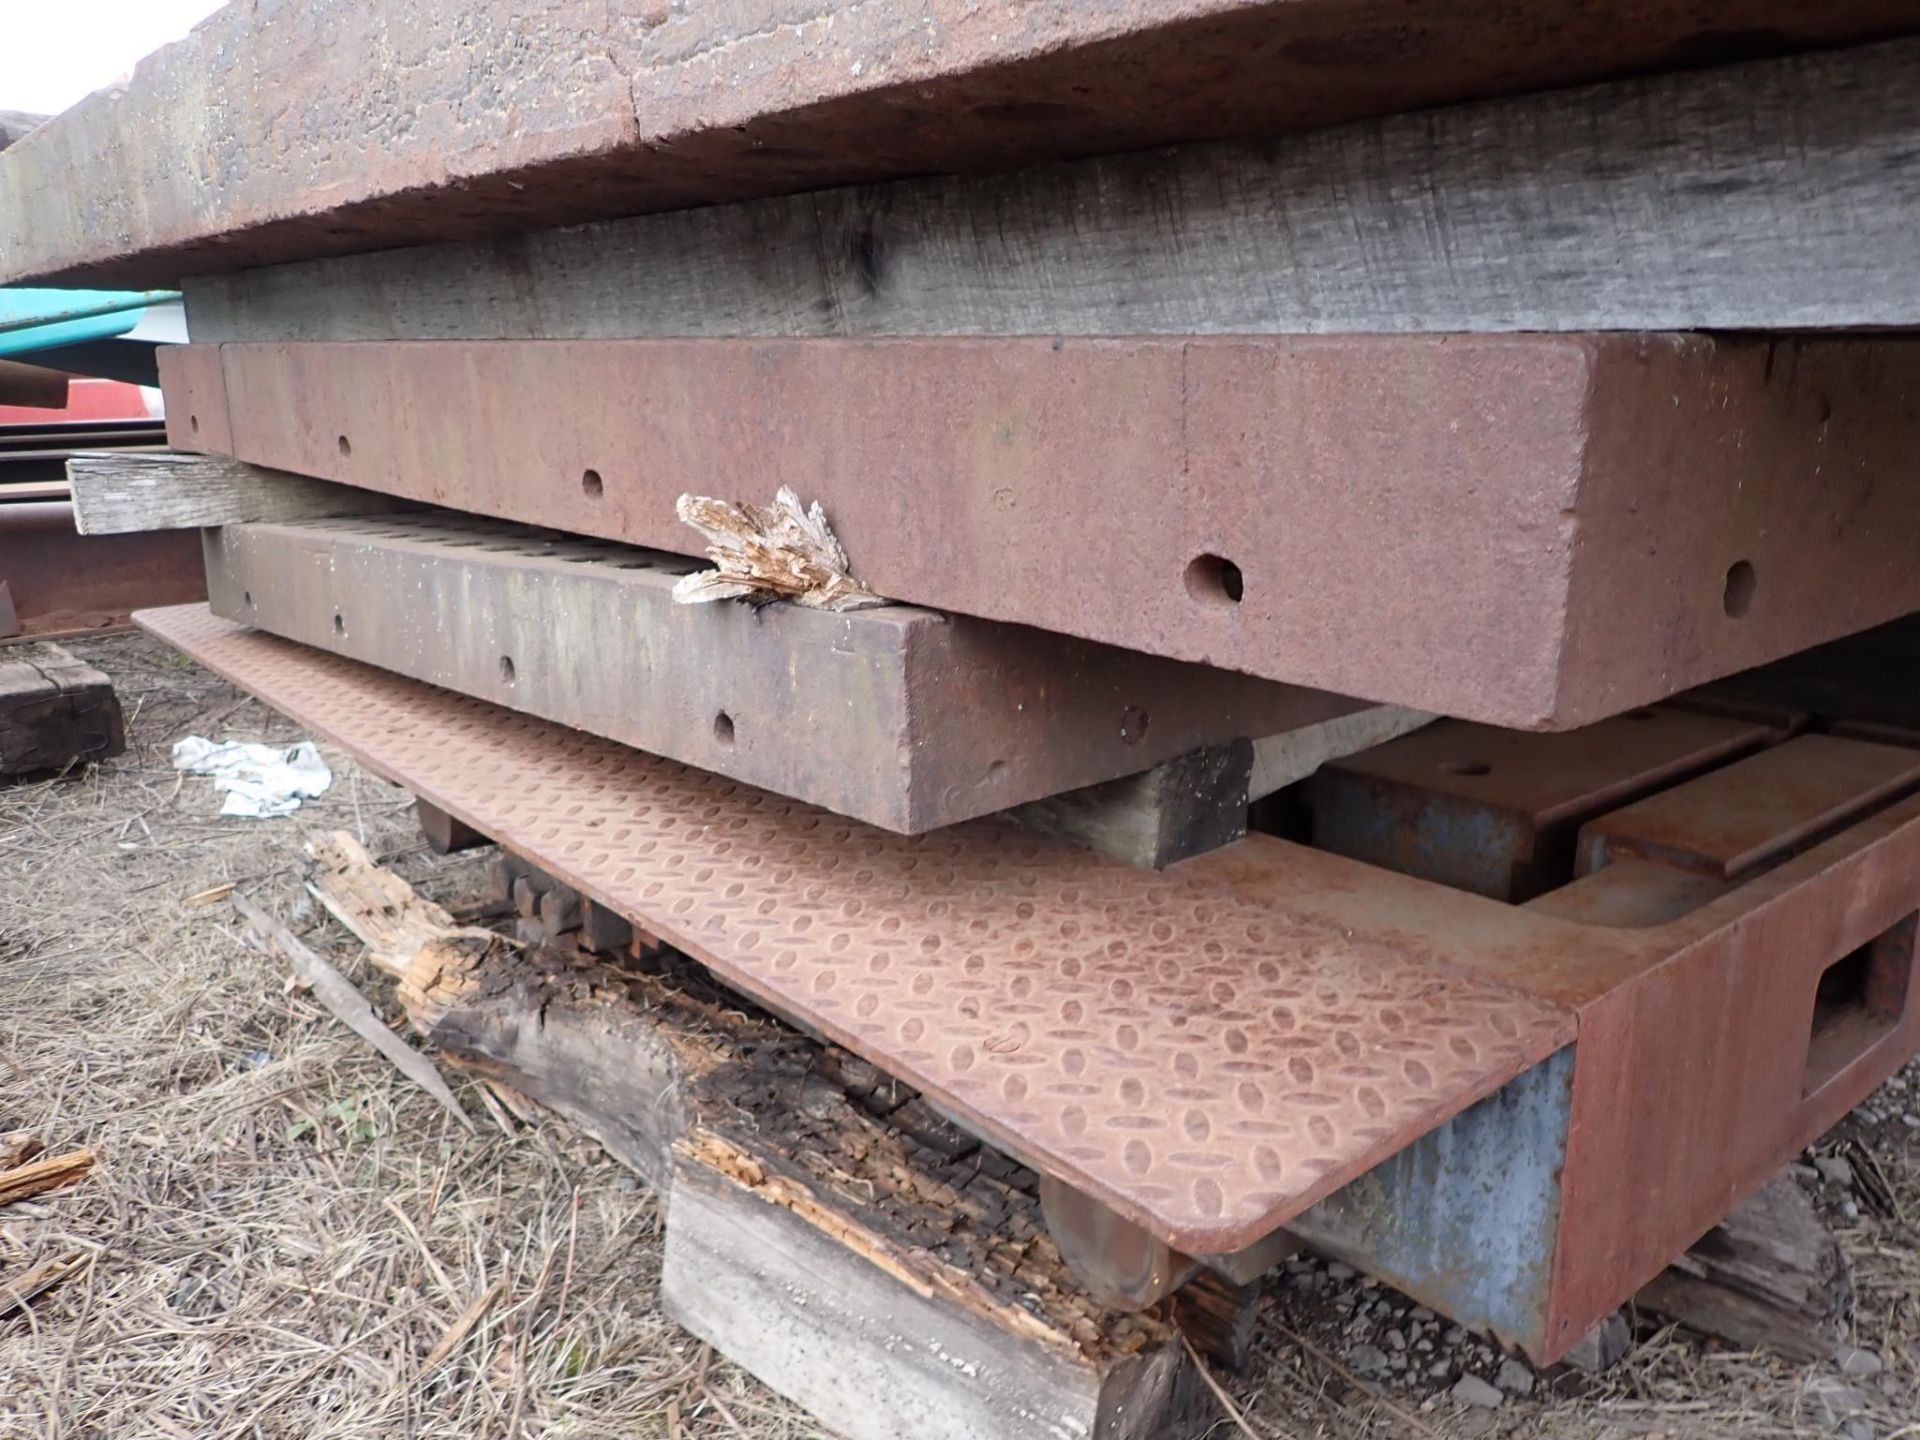 Acorn Type Welding Platen 86" x 61" x 6" high 1-7/8" square holes This item will have an additional - Image 22 of 24